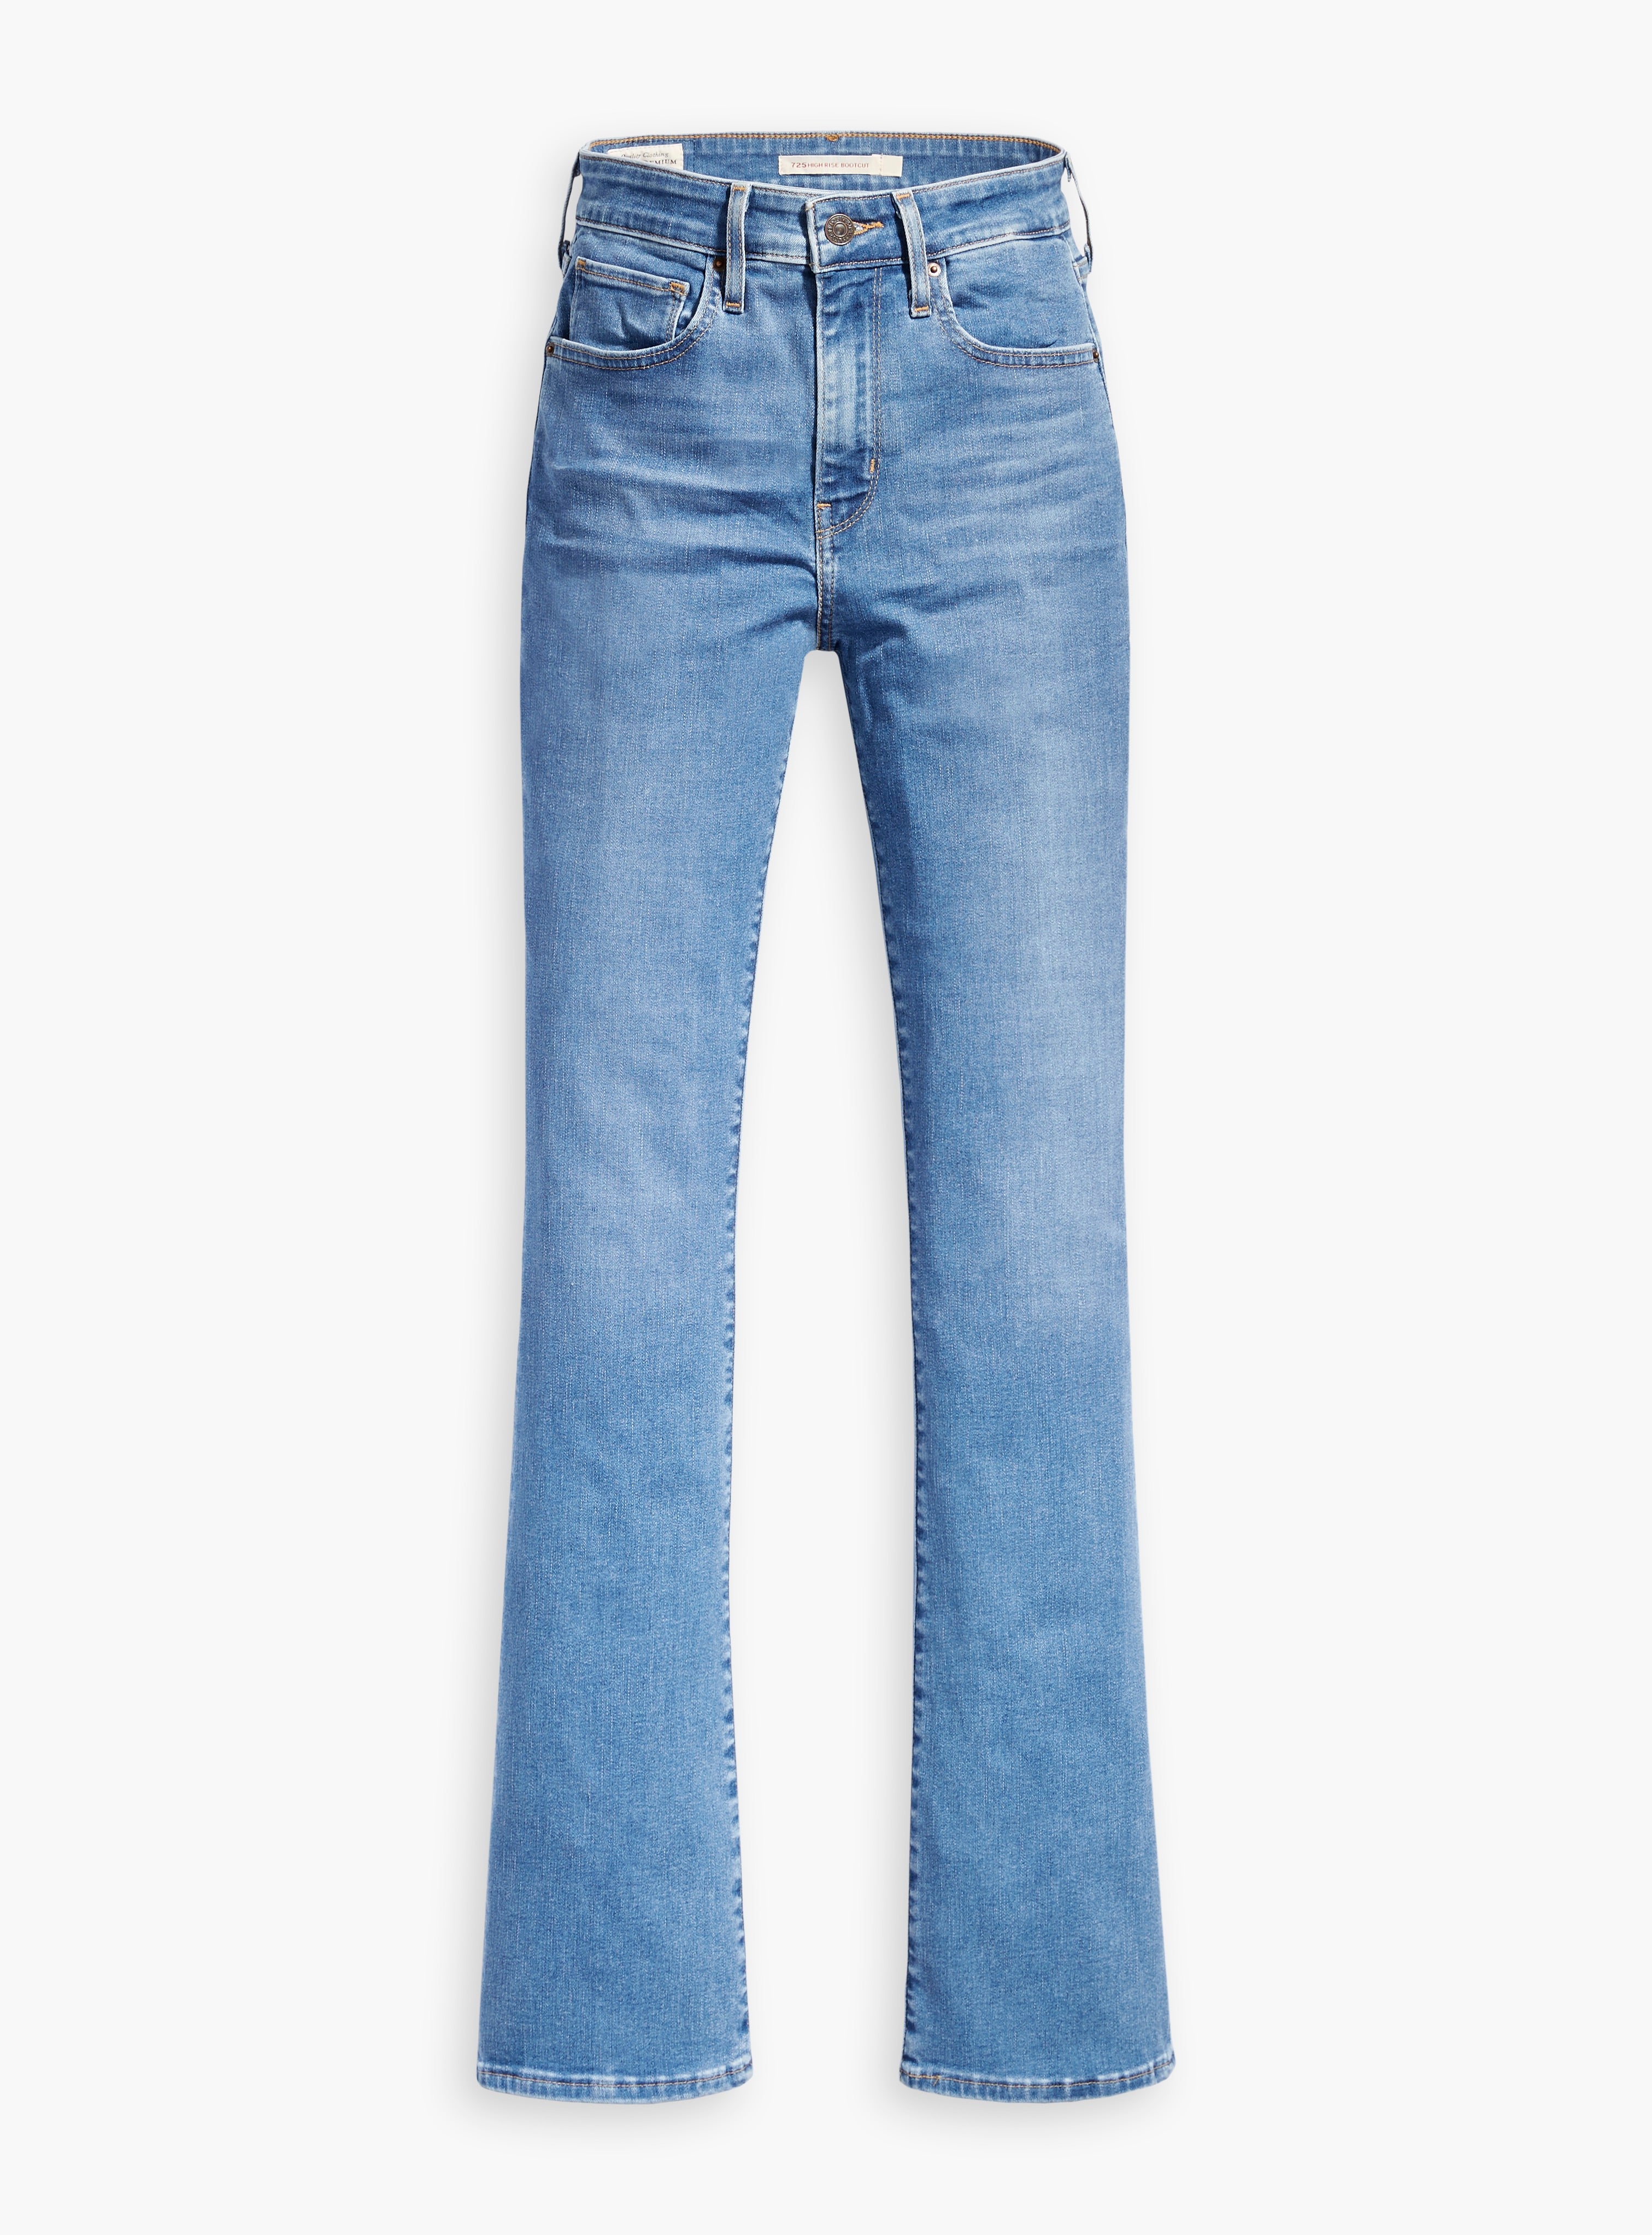 Levi’s + 725 High Rise Bootcut Jeans